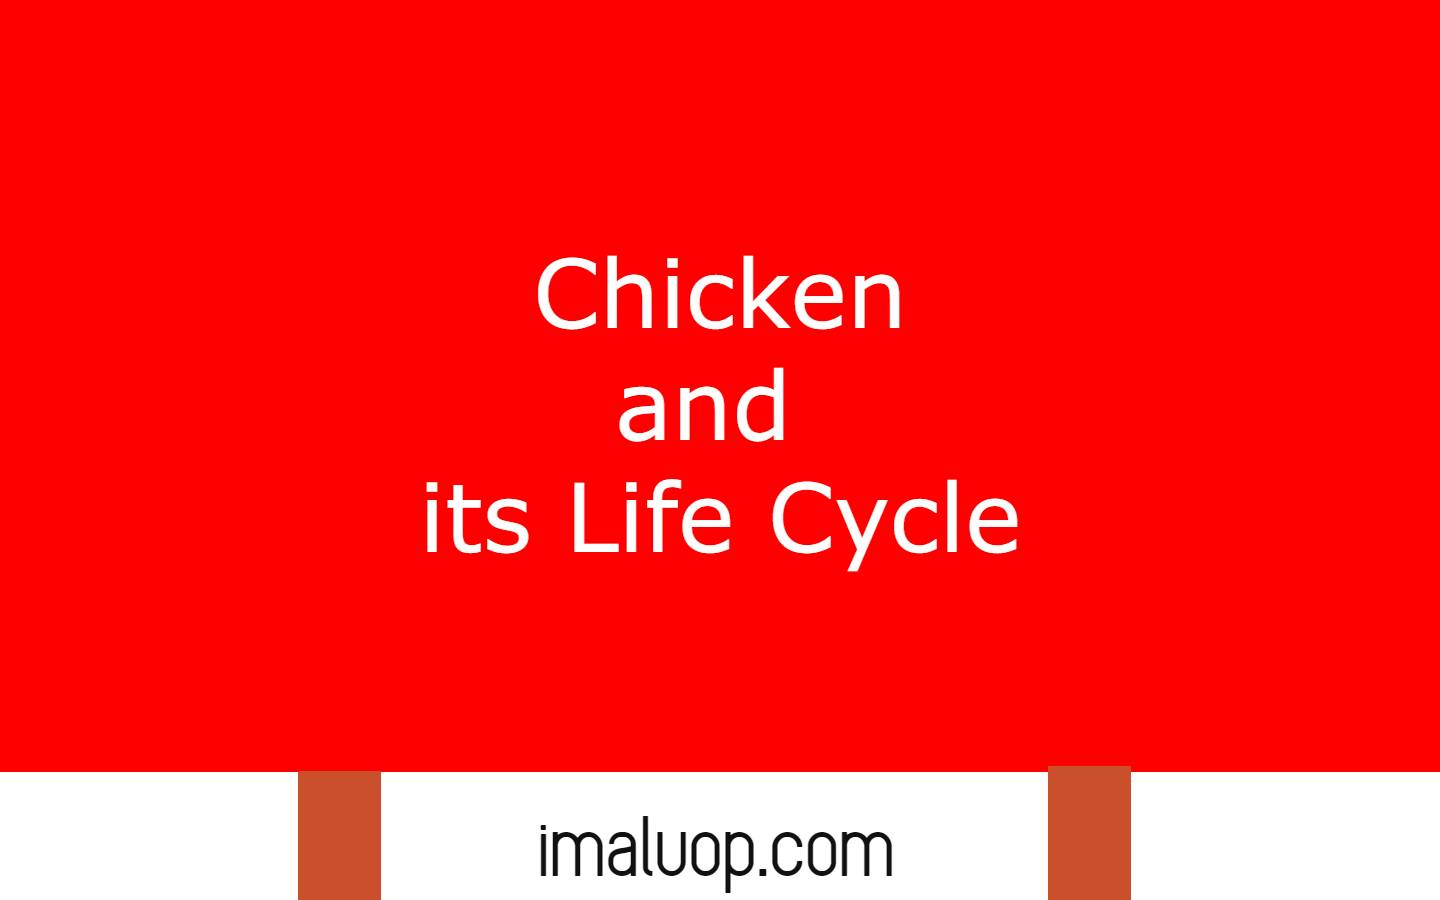 Chicken and its Life Cycle